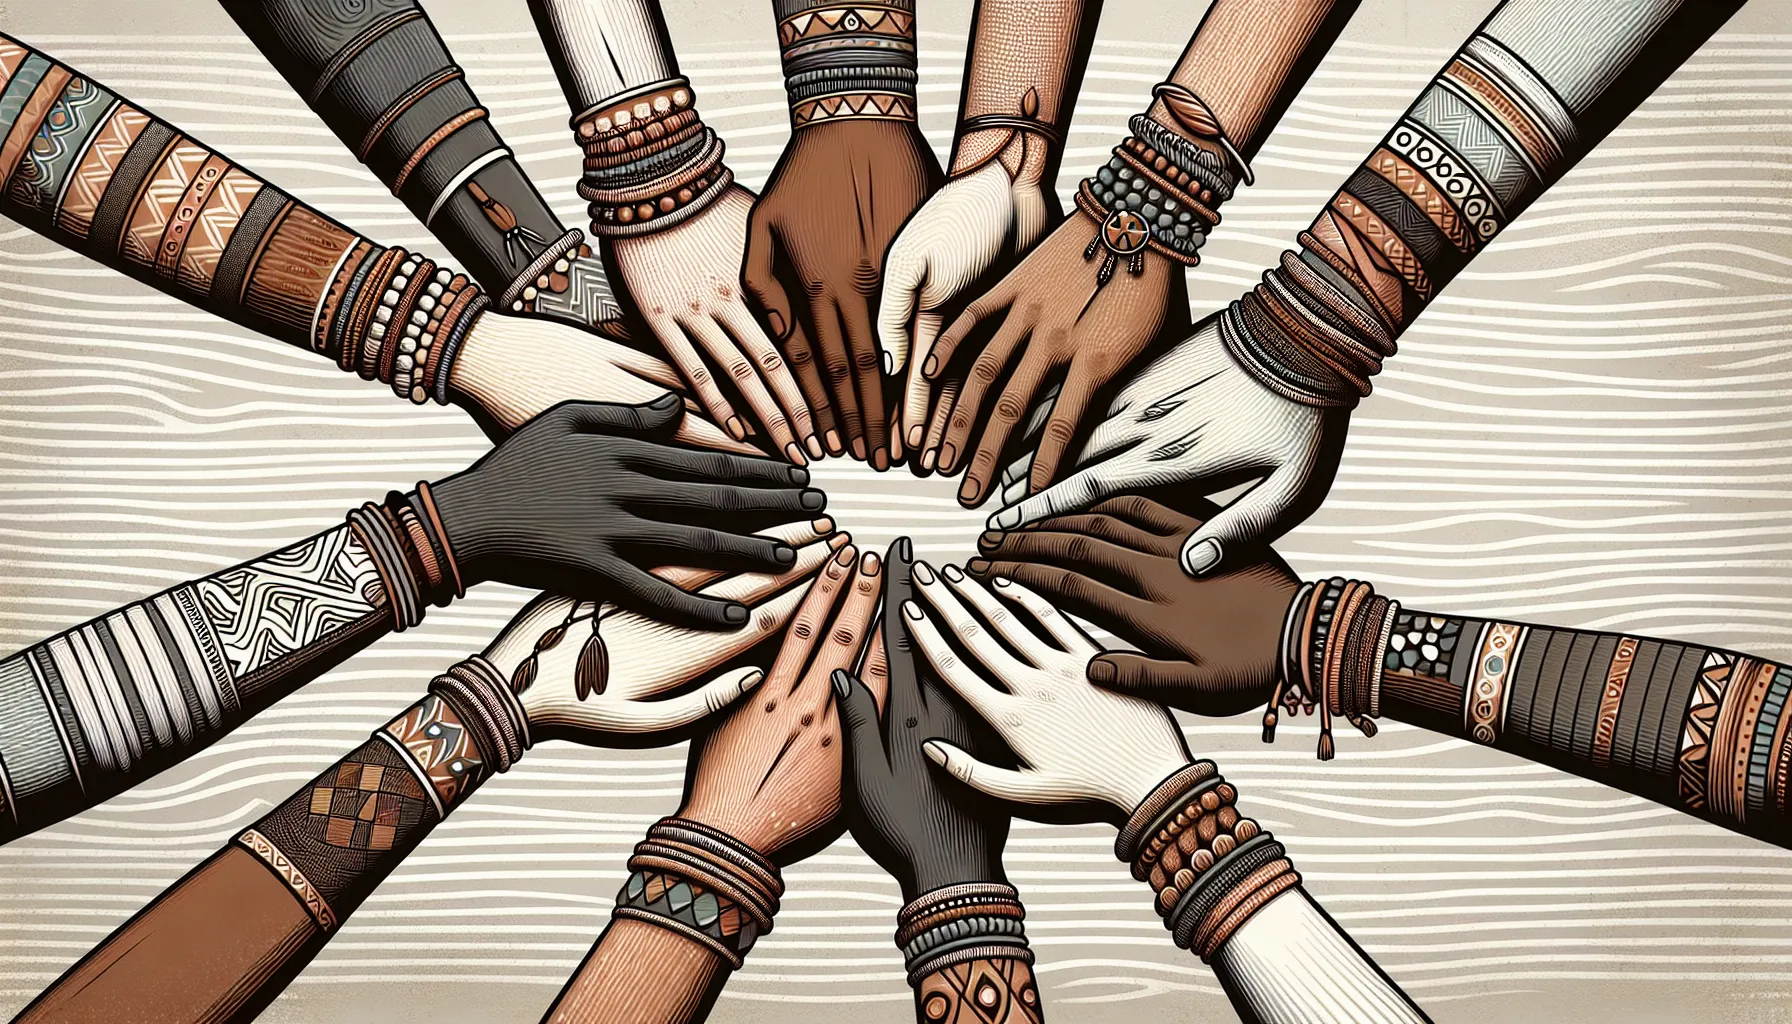 <strong>Together as Equals:</strong> This image captures the essence of modern partnership, where hands of diverse identities unite, symbolizing the depth and inclusivity of the bonds we form in today's interconnected world.